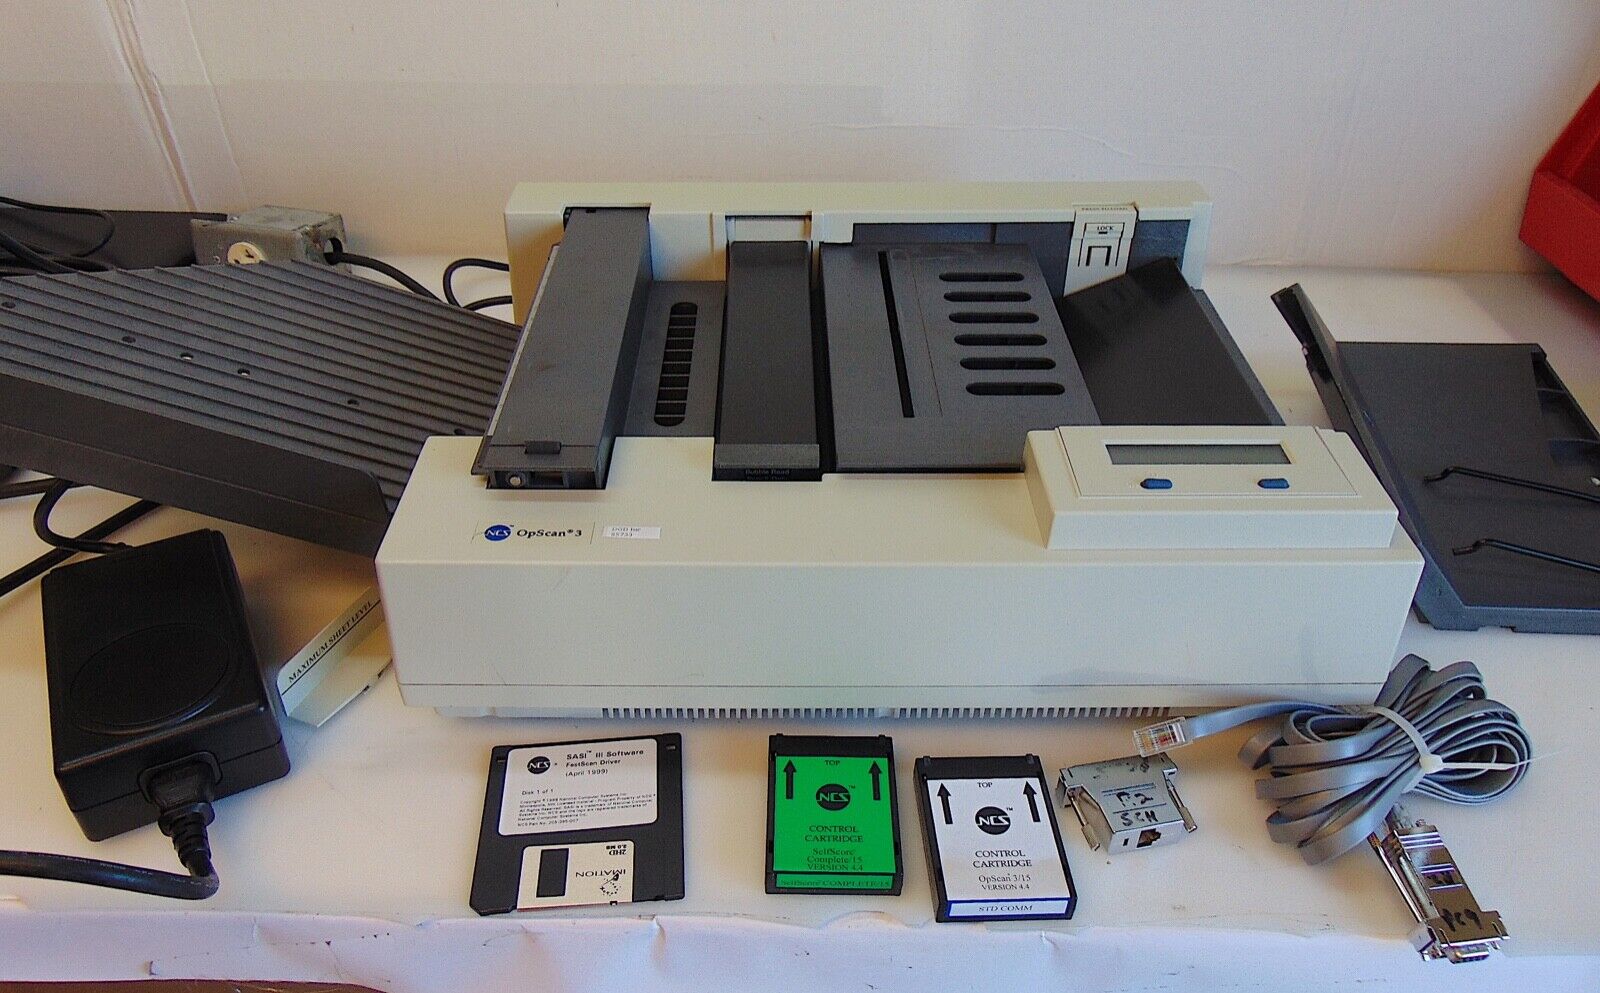 NCS OpScan 3 Scan1OXA  With Power Supply, Control Cartridges, Scandisc  S5733 